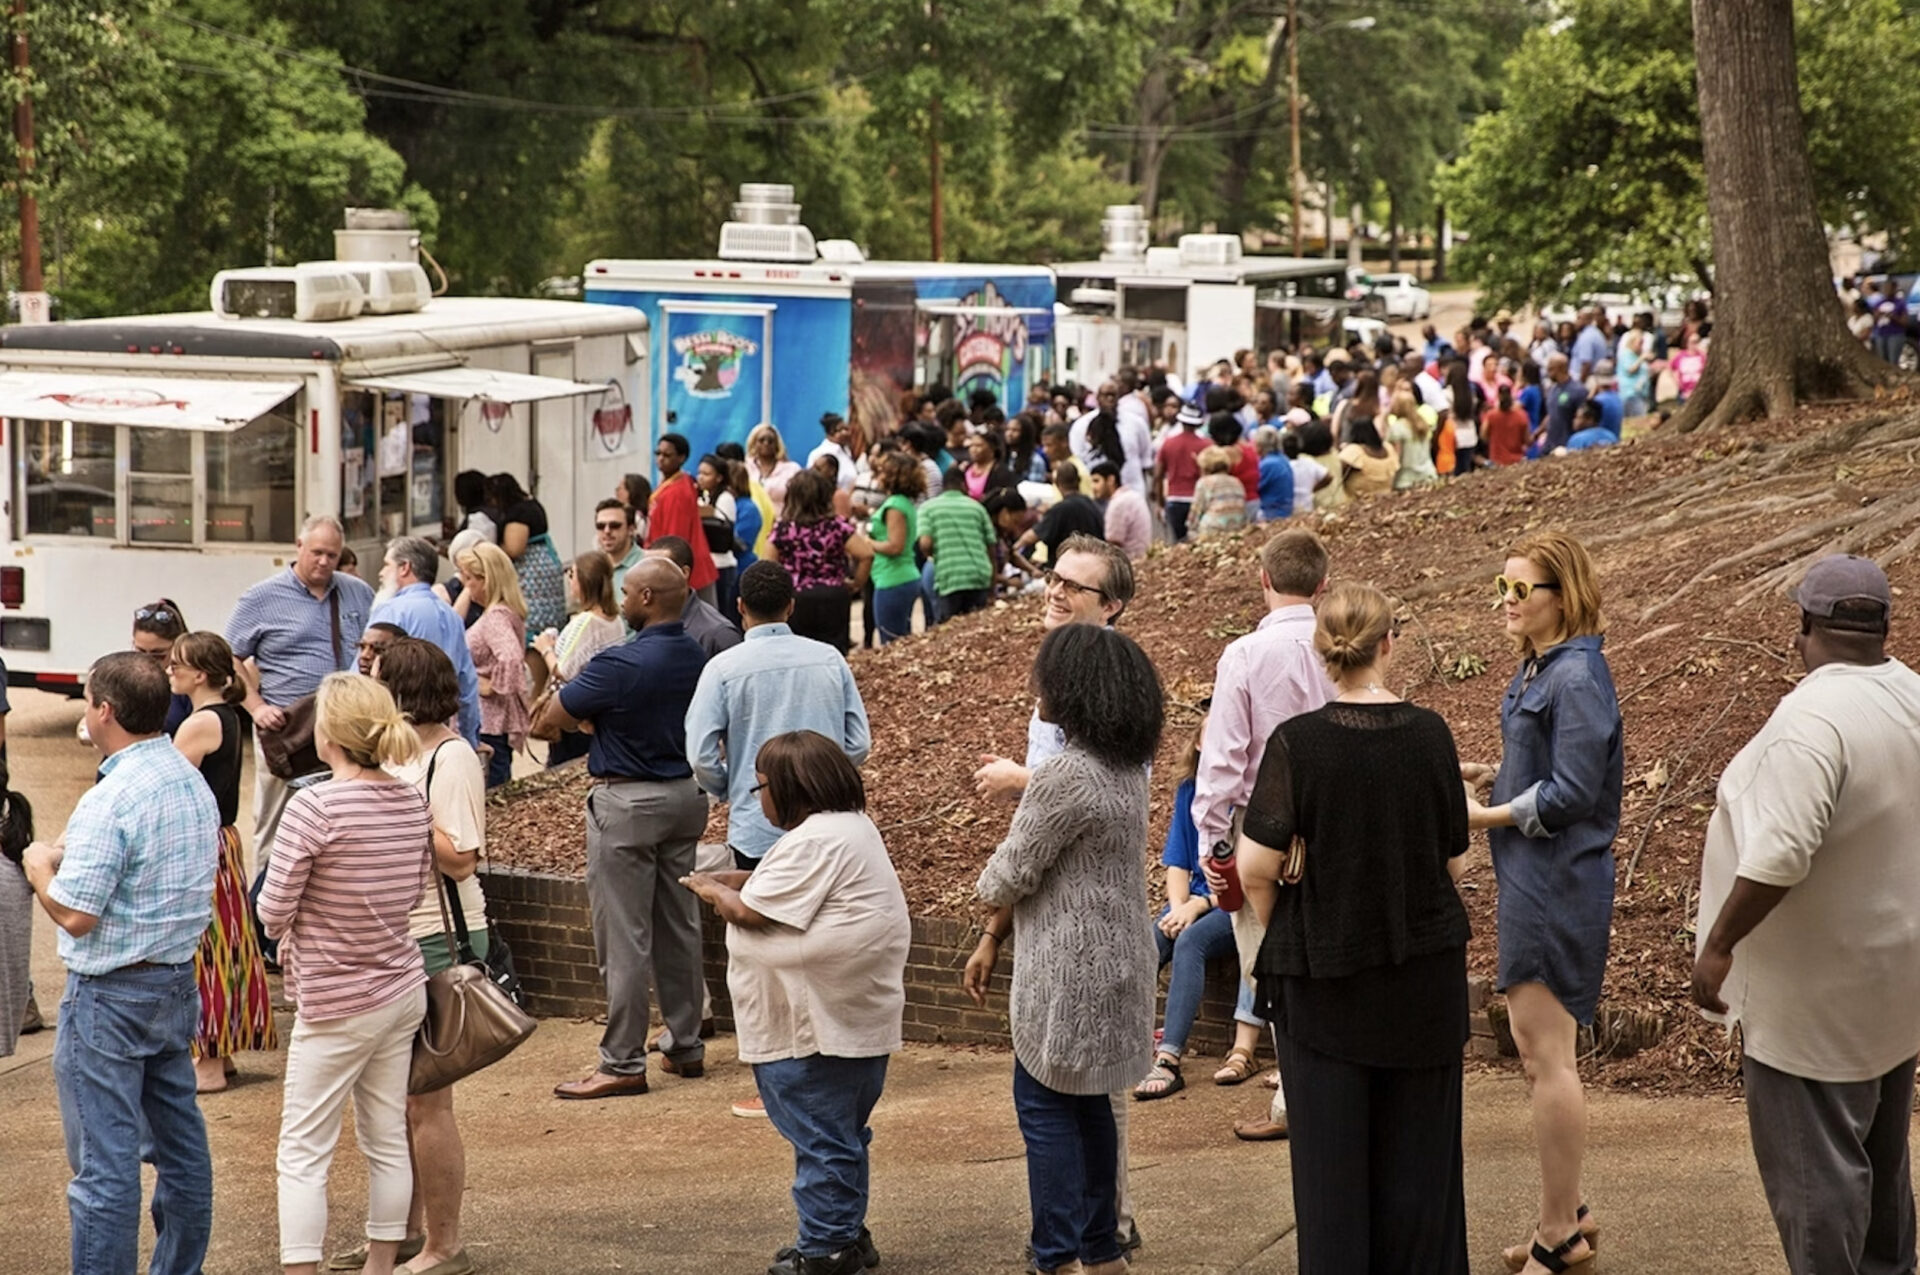 Food Truck Friday in the Park!